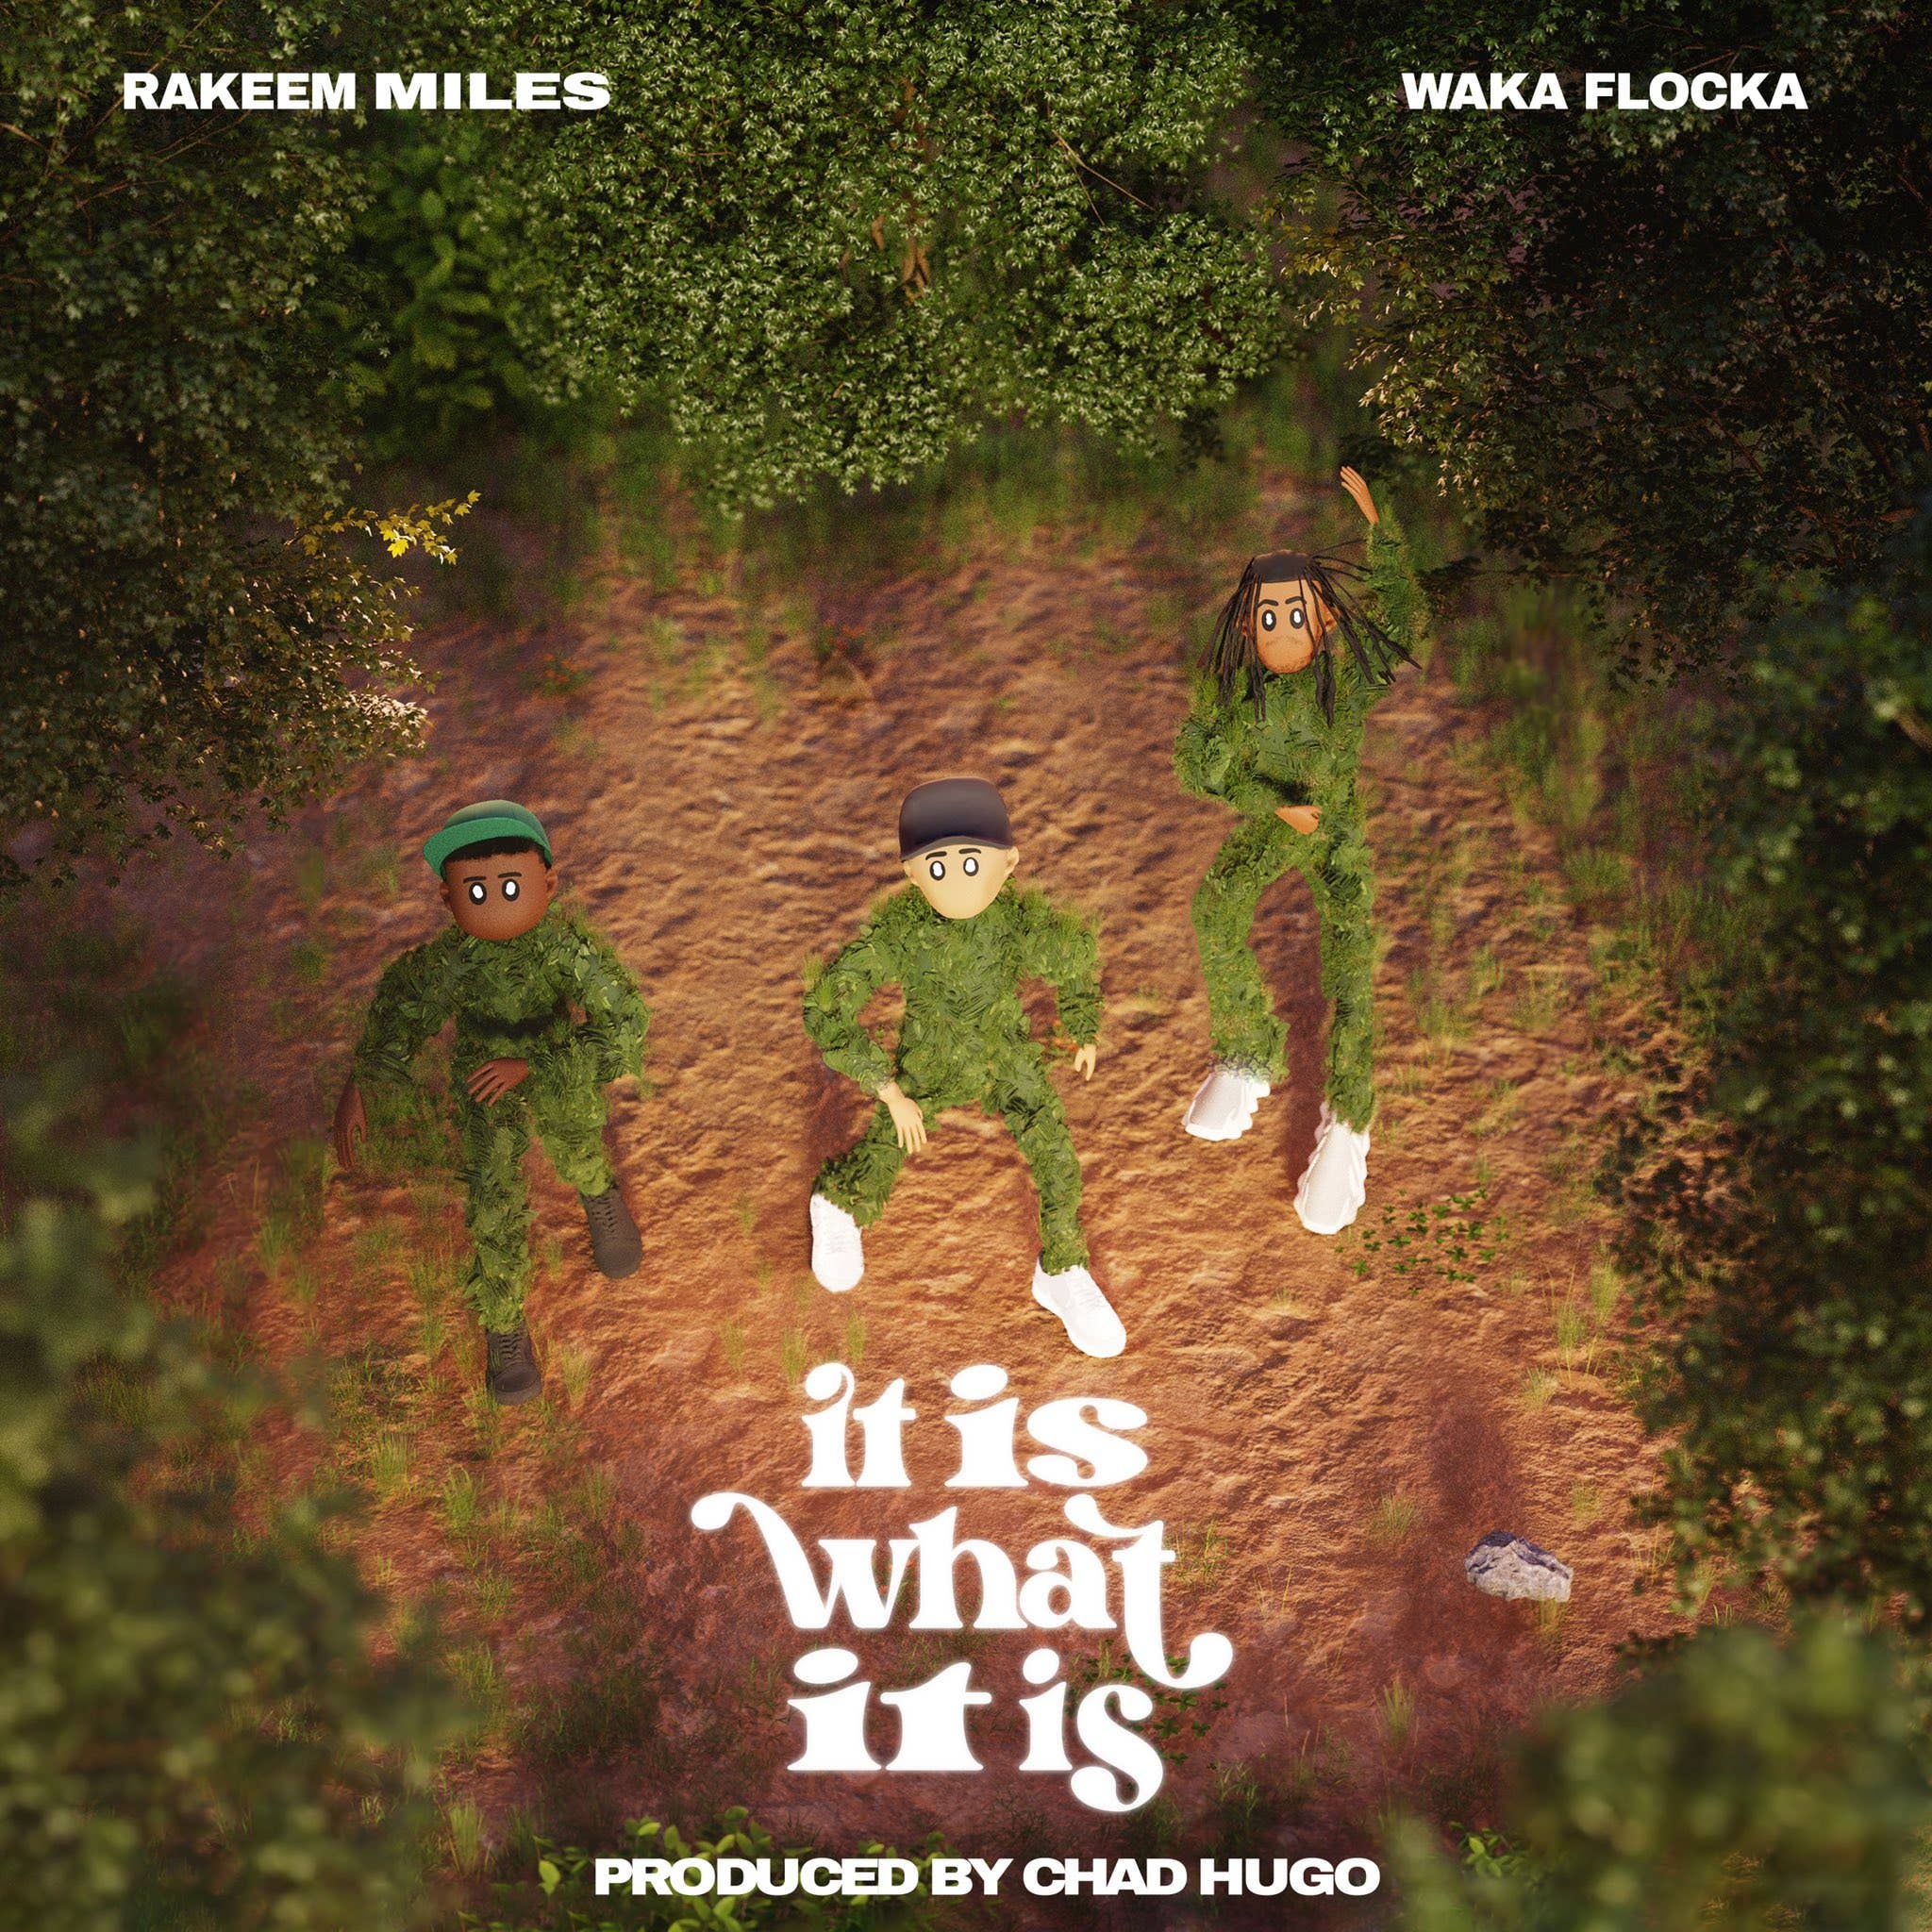 Rakeem Miles and Waka Flocka's new Chad Hugo-produced single 'It Is What It Is' cover art.